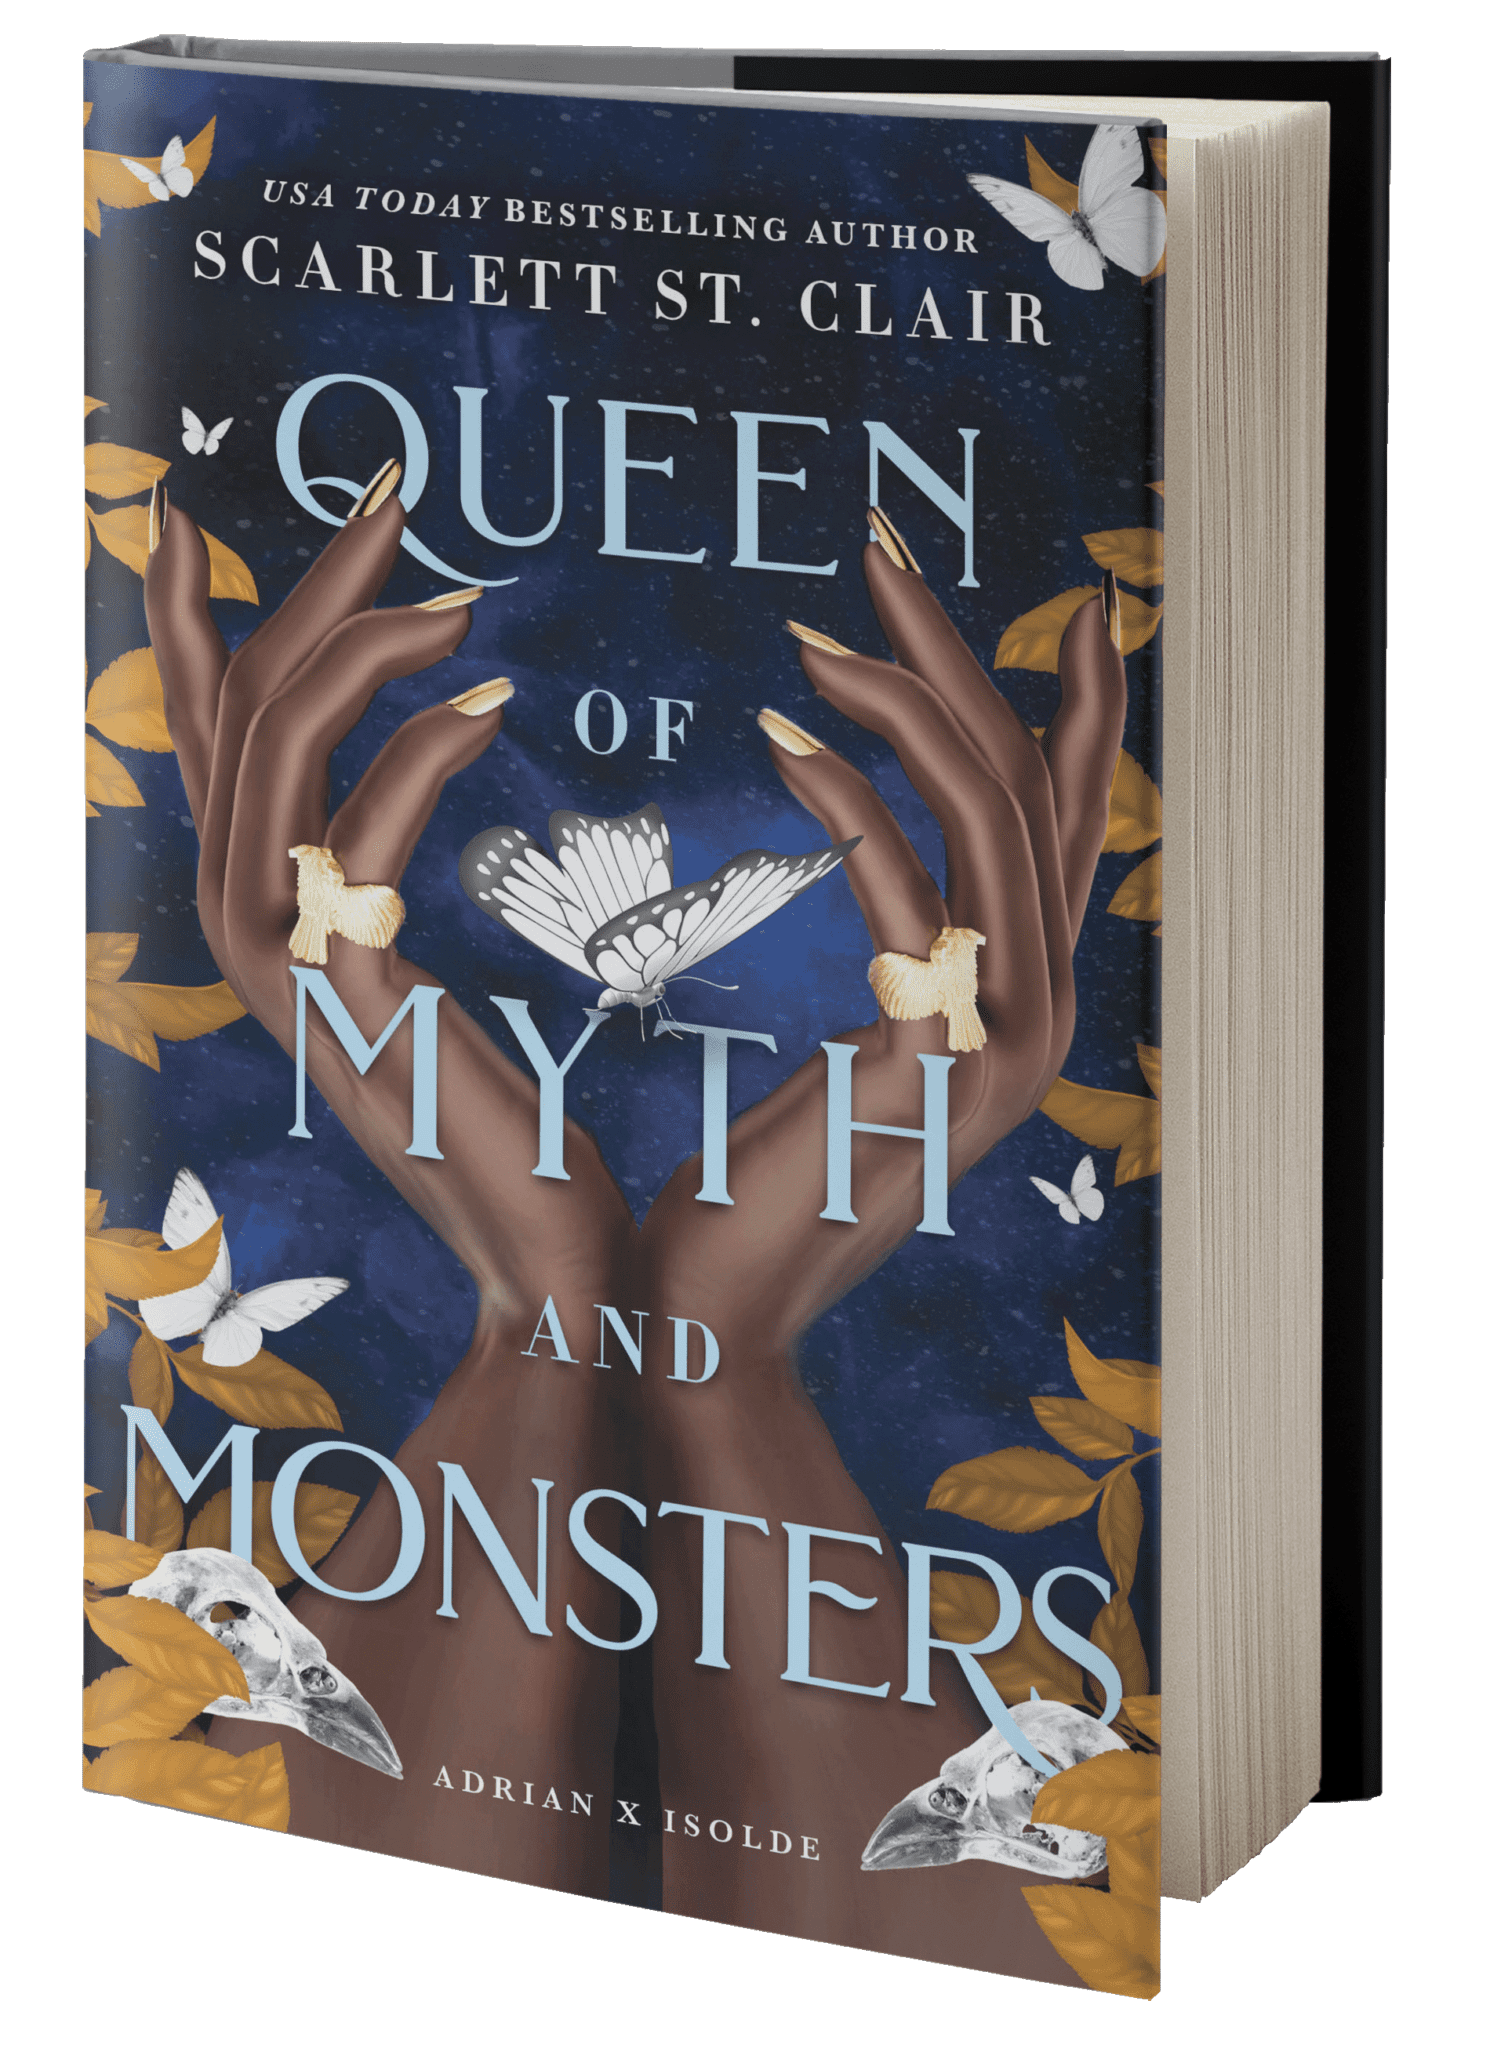 Book cover of "Queen of Myth and Monsters"